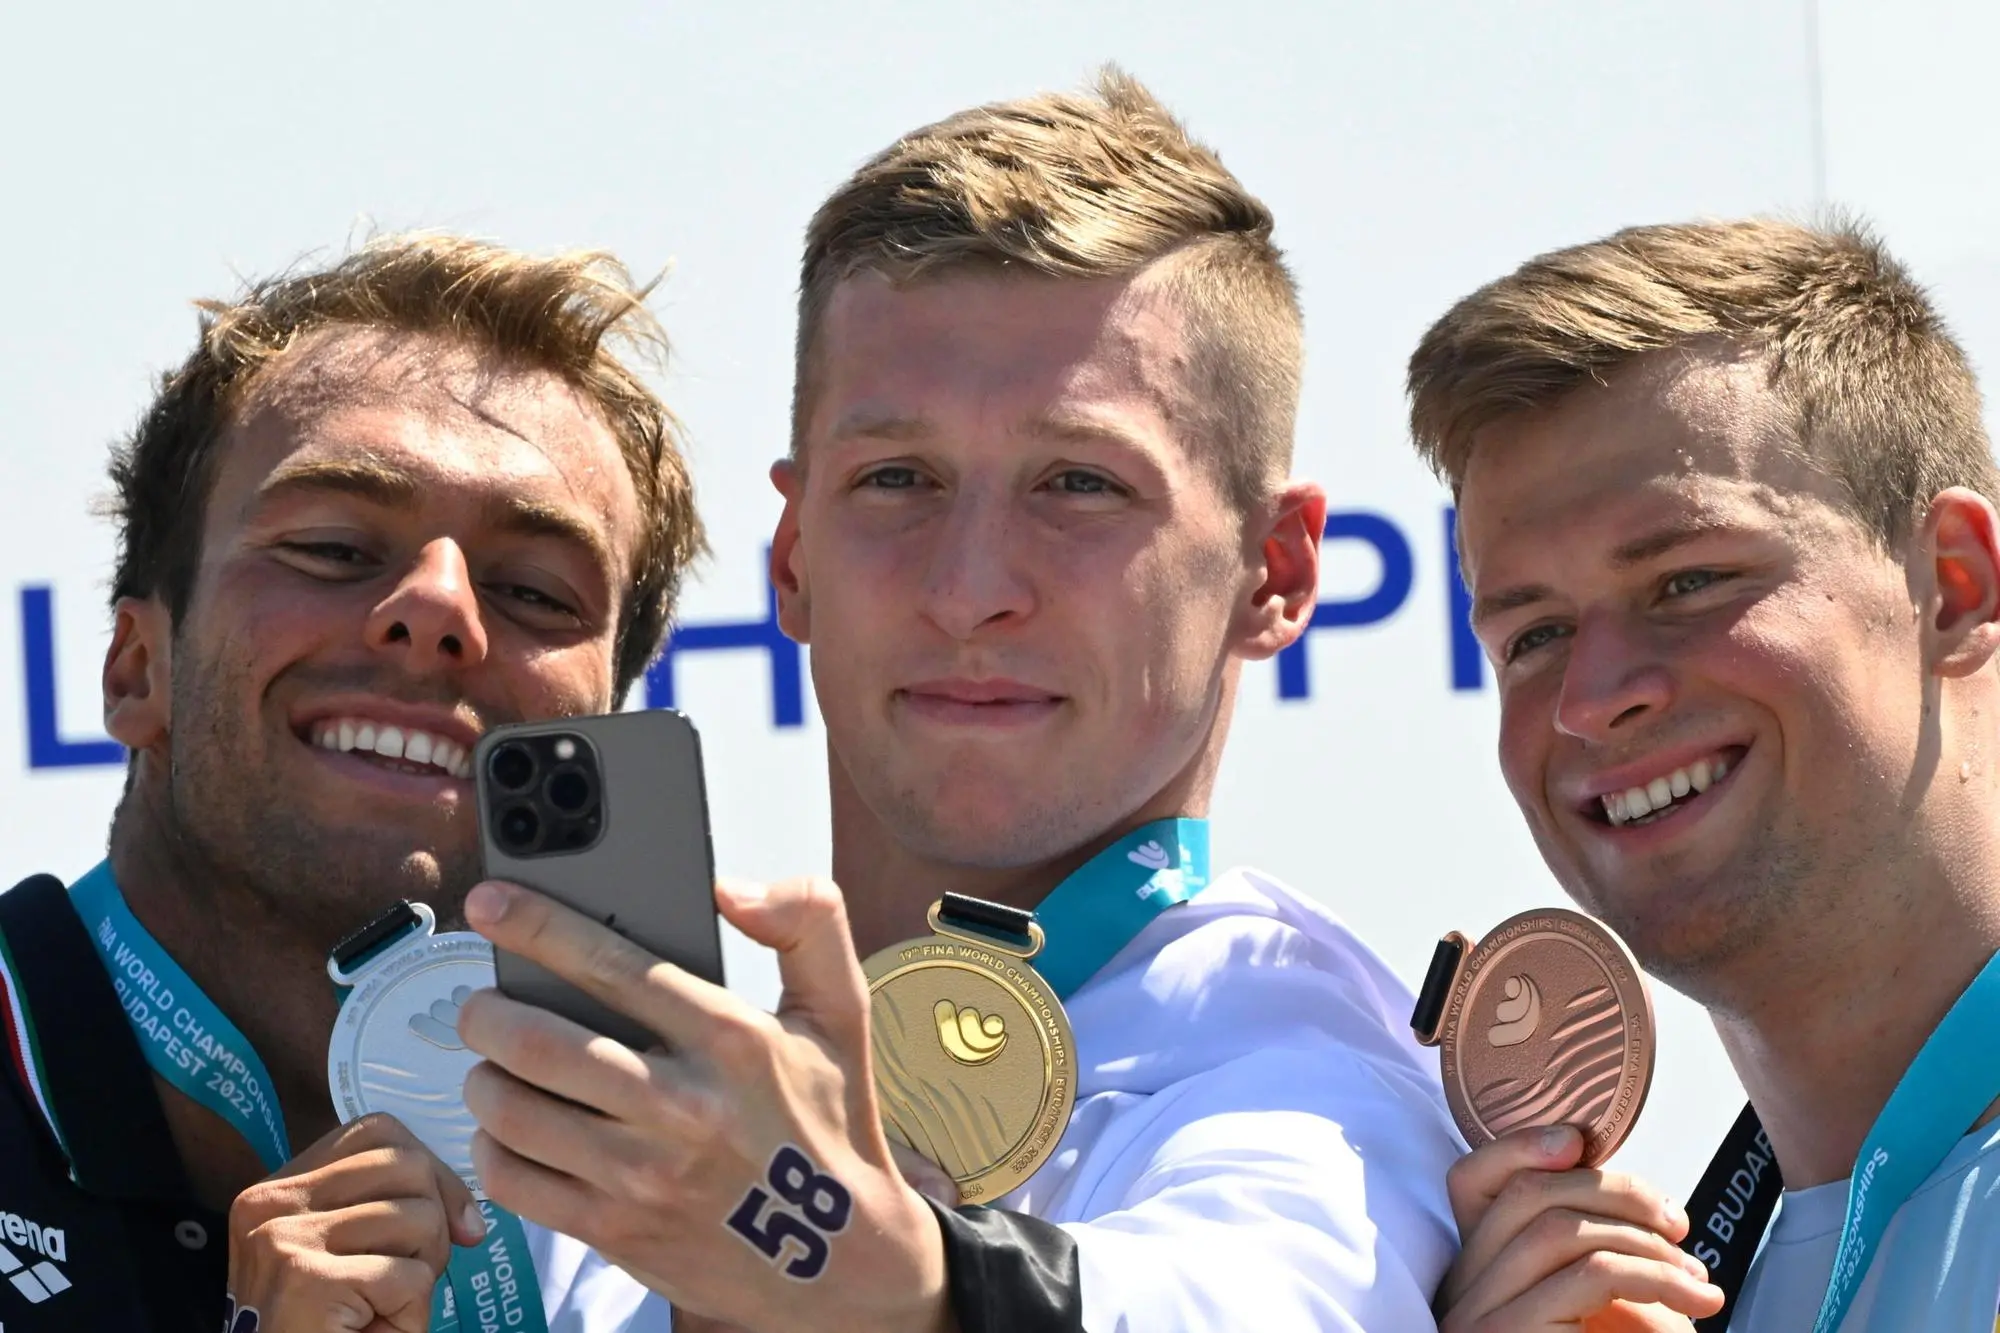 epa10036180 (L-R) Silver medalist Gregorio Paltrinieri of Italy, gold medalist Florian Wellbrock of Germany and bronze medalist Mykhailo Romanchuk of Ukraine pose for photographs during the award ceremony for the men's 5km open water swimming of the 19th FINA World Championships at Lupa lake near Budapest, Hungary, 27 June 2022. EPA/Zsolt Szigetvary HUNGARY OUT